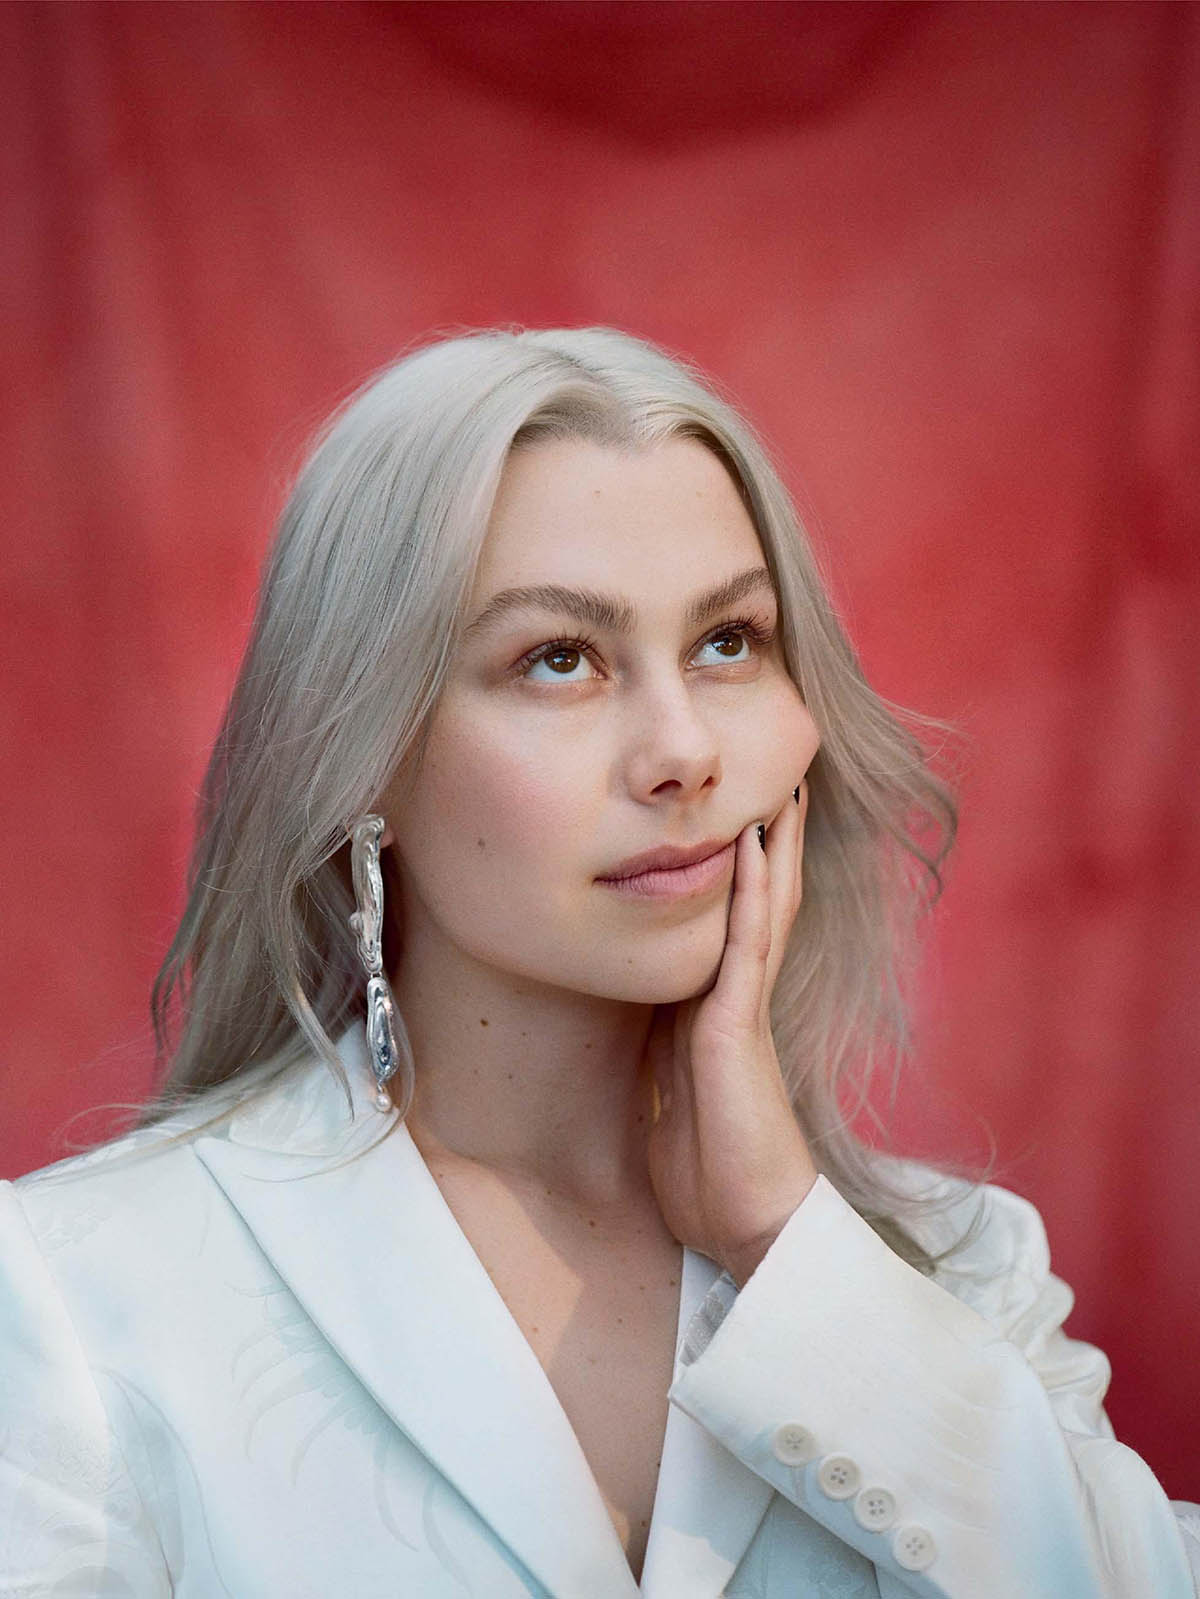 Phoebe Bridgers covers The Sunday Times Style April 11th, 2021 by Olivia Malone